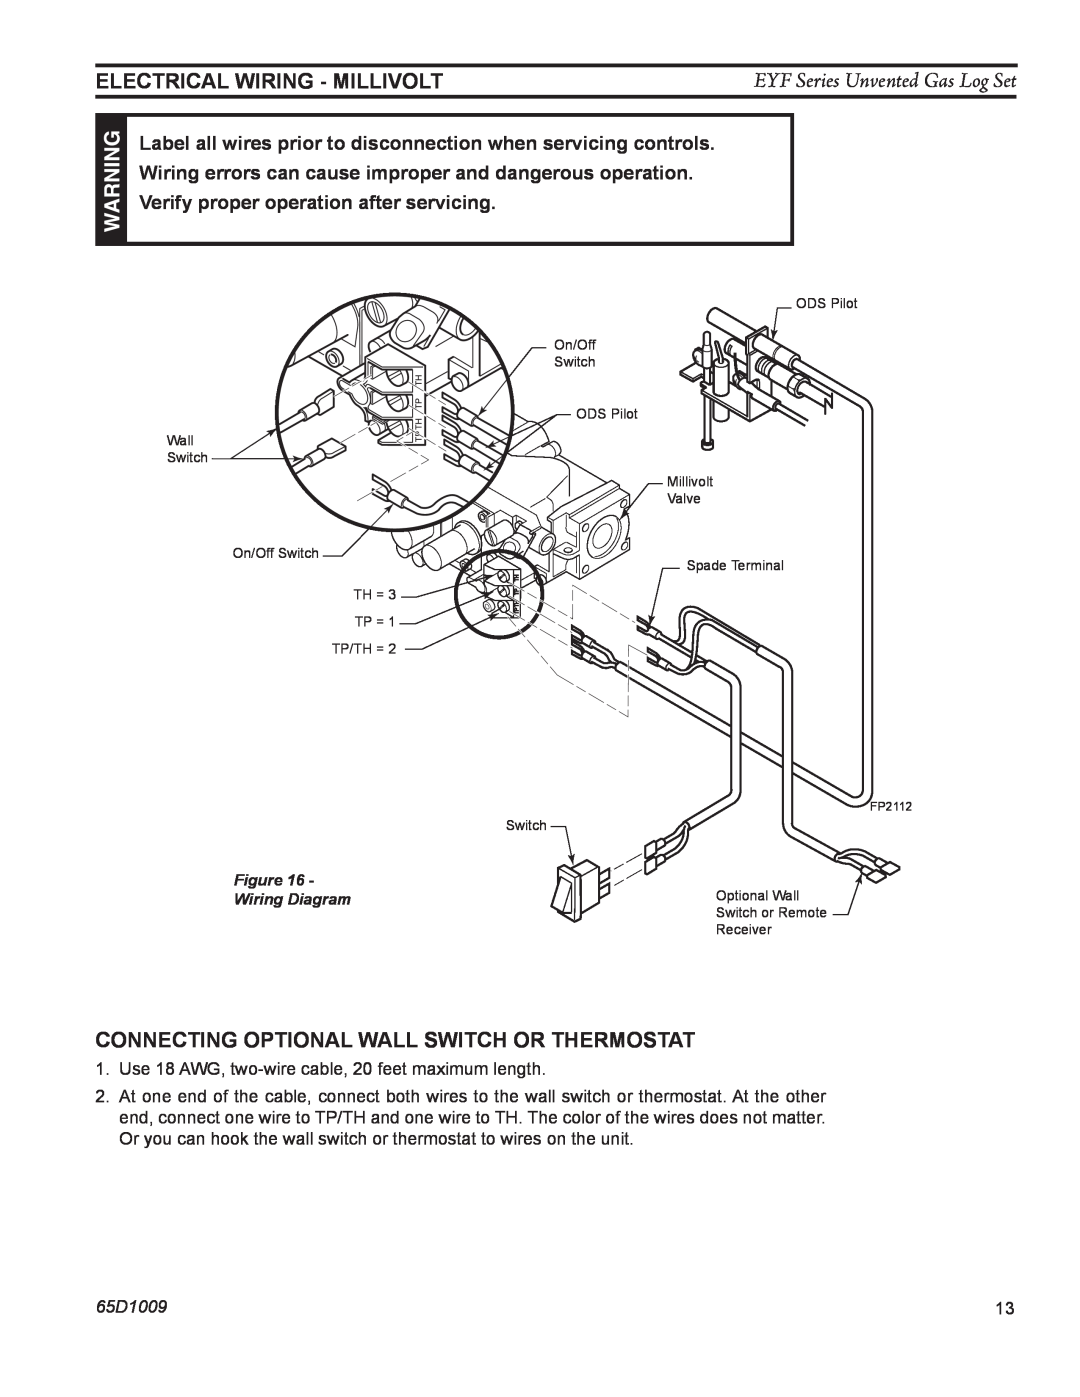 Monessen Hearth EYF18, EYF24 manual Electrical Wiring - Millivolt, Connecting Optional Wall Switch or Thermostat 